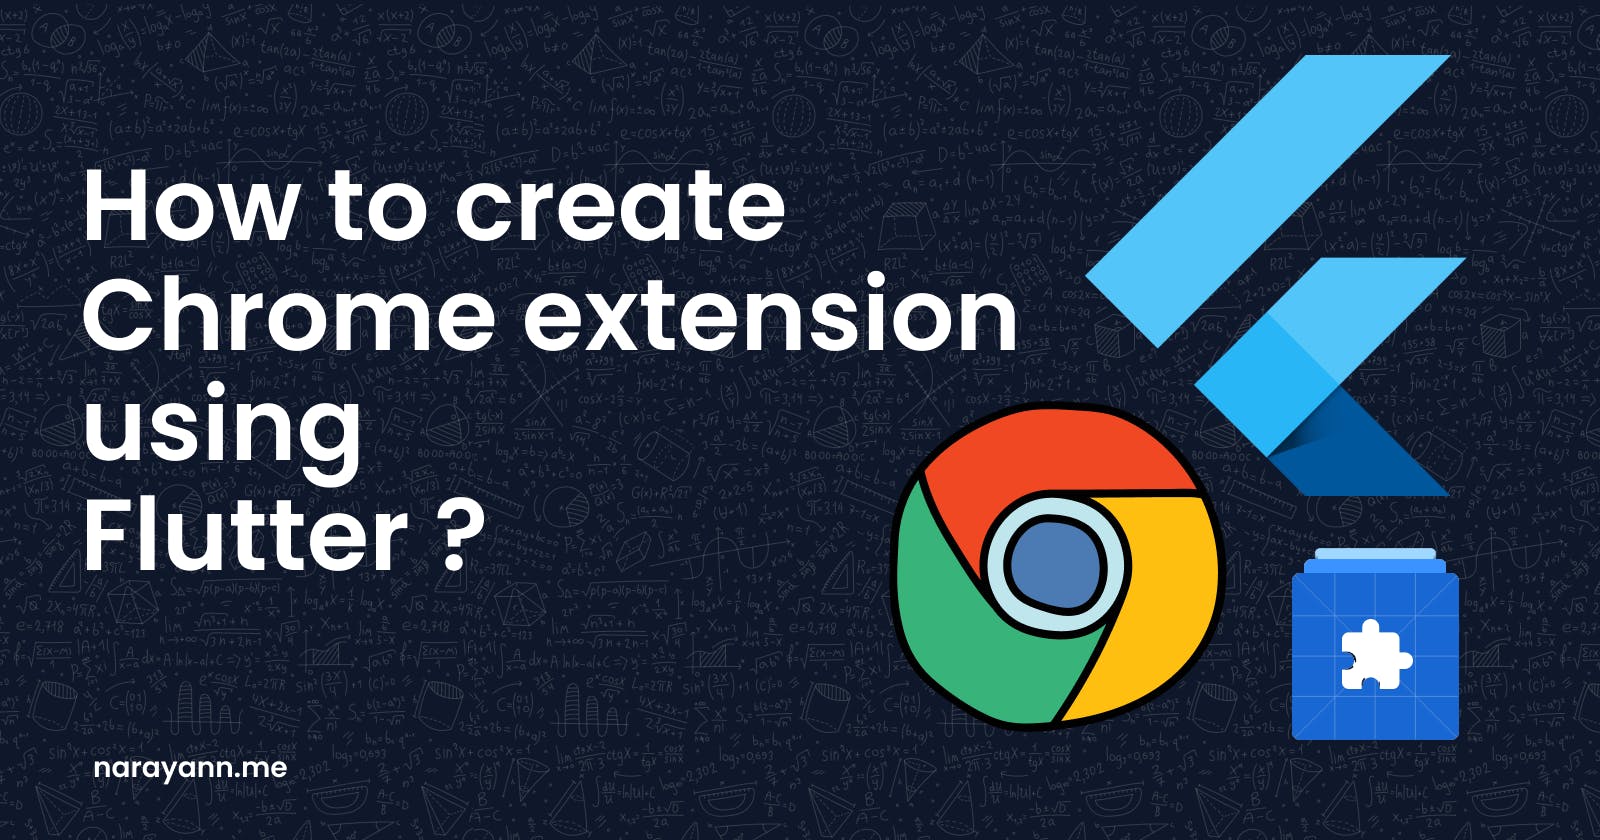 How to create Chrome extension using Flutter?